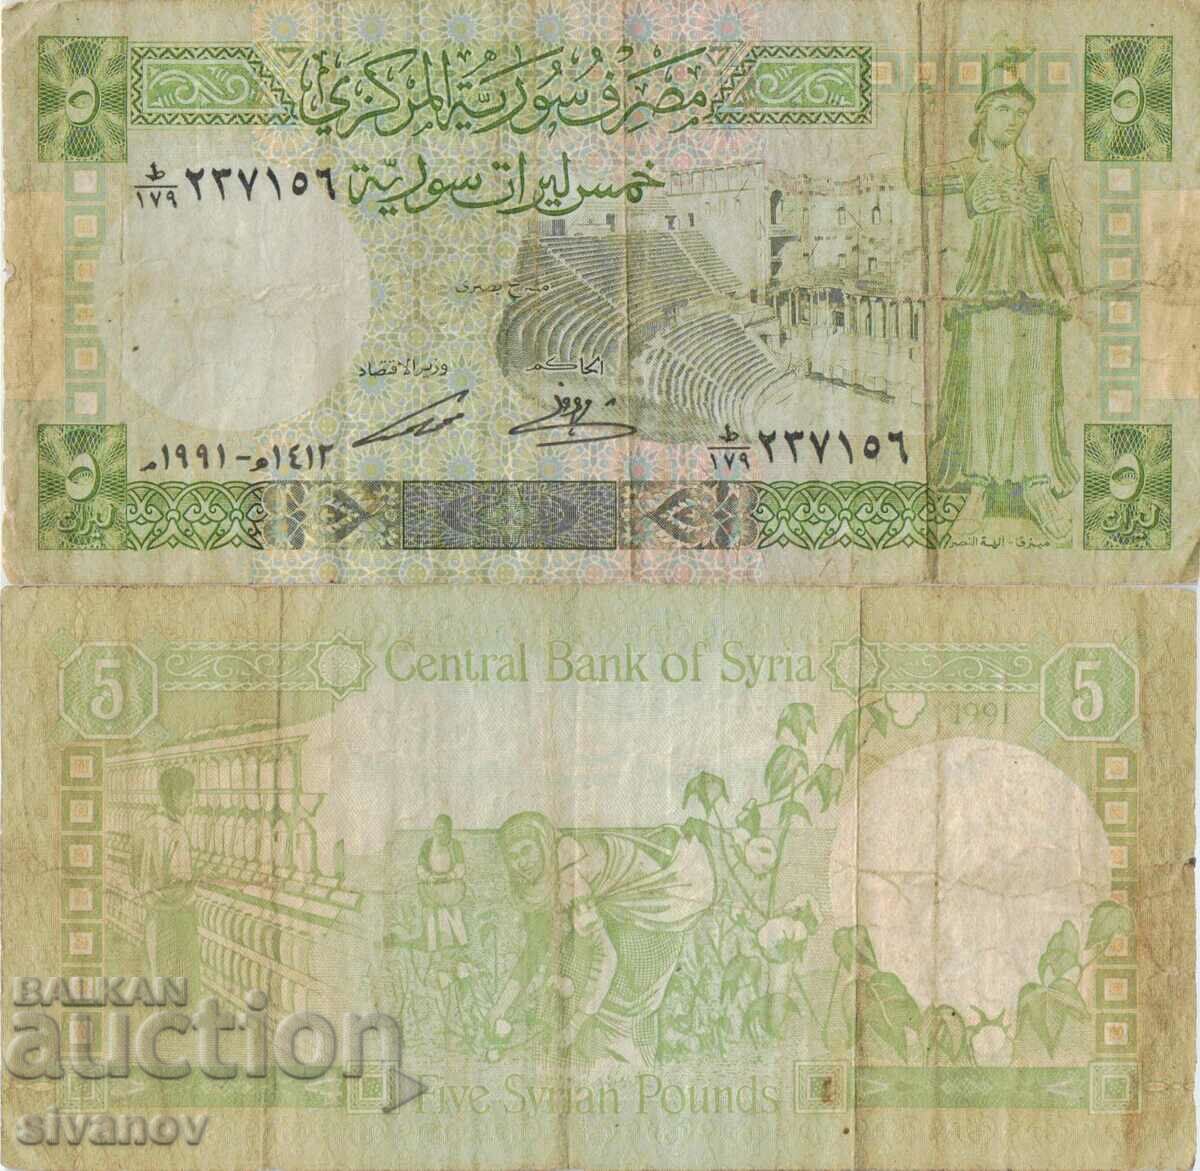 Syria 5 Pounds 1991 Banknote #5342